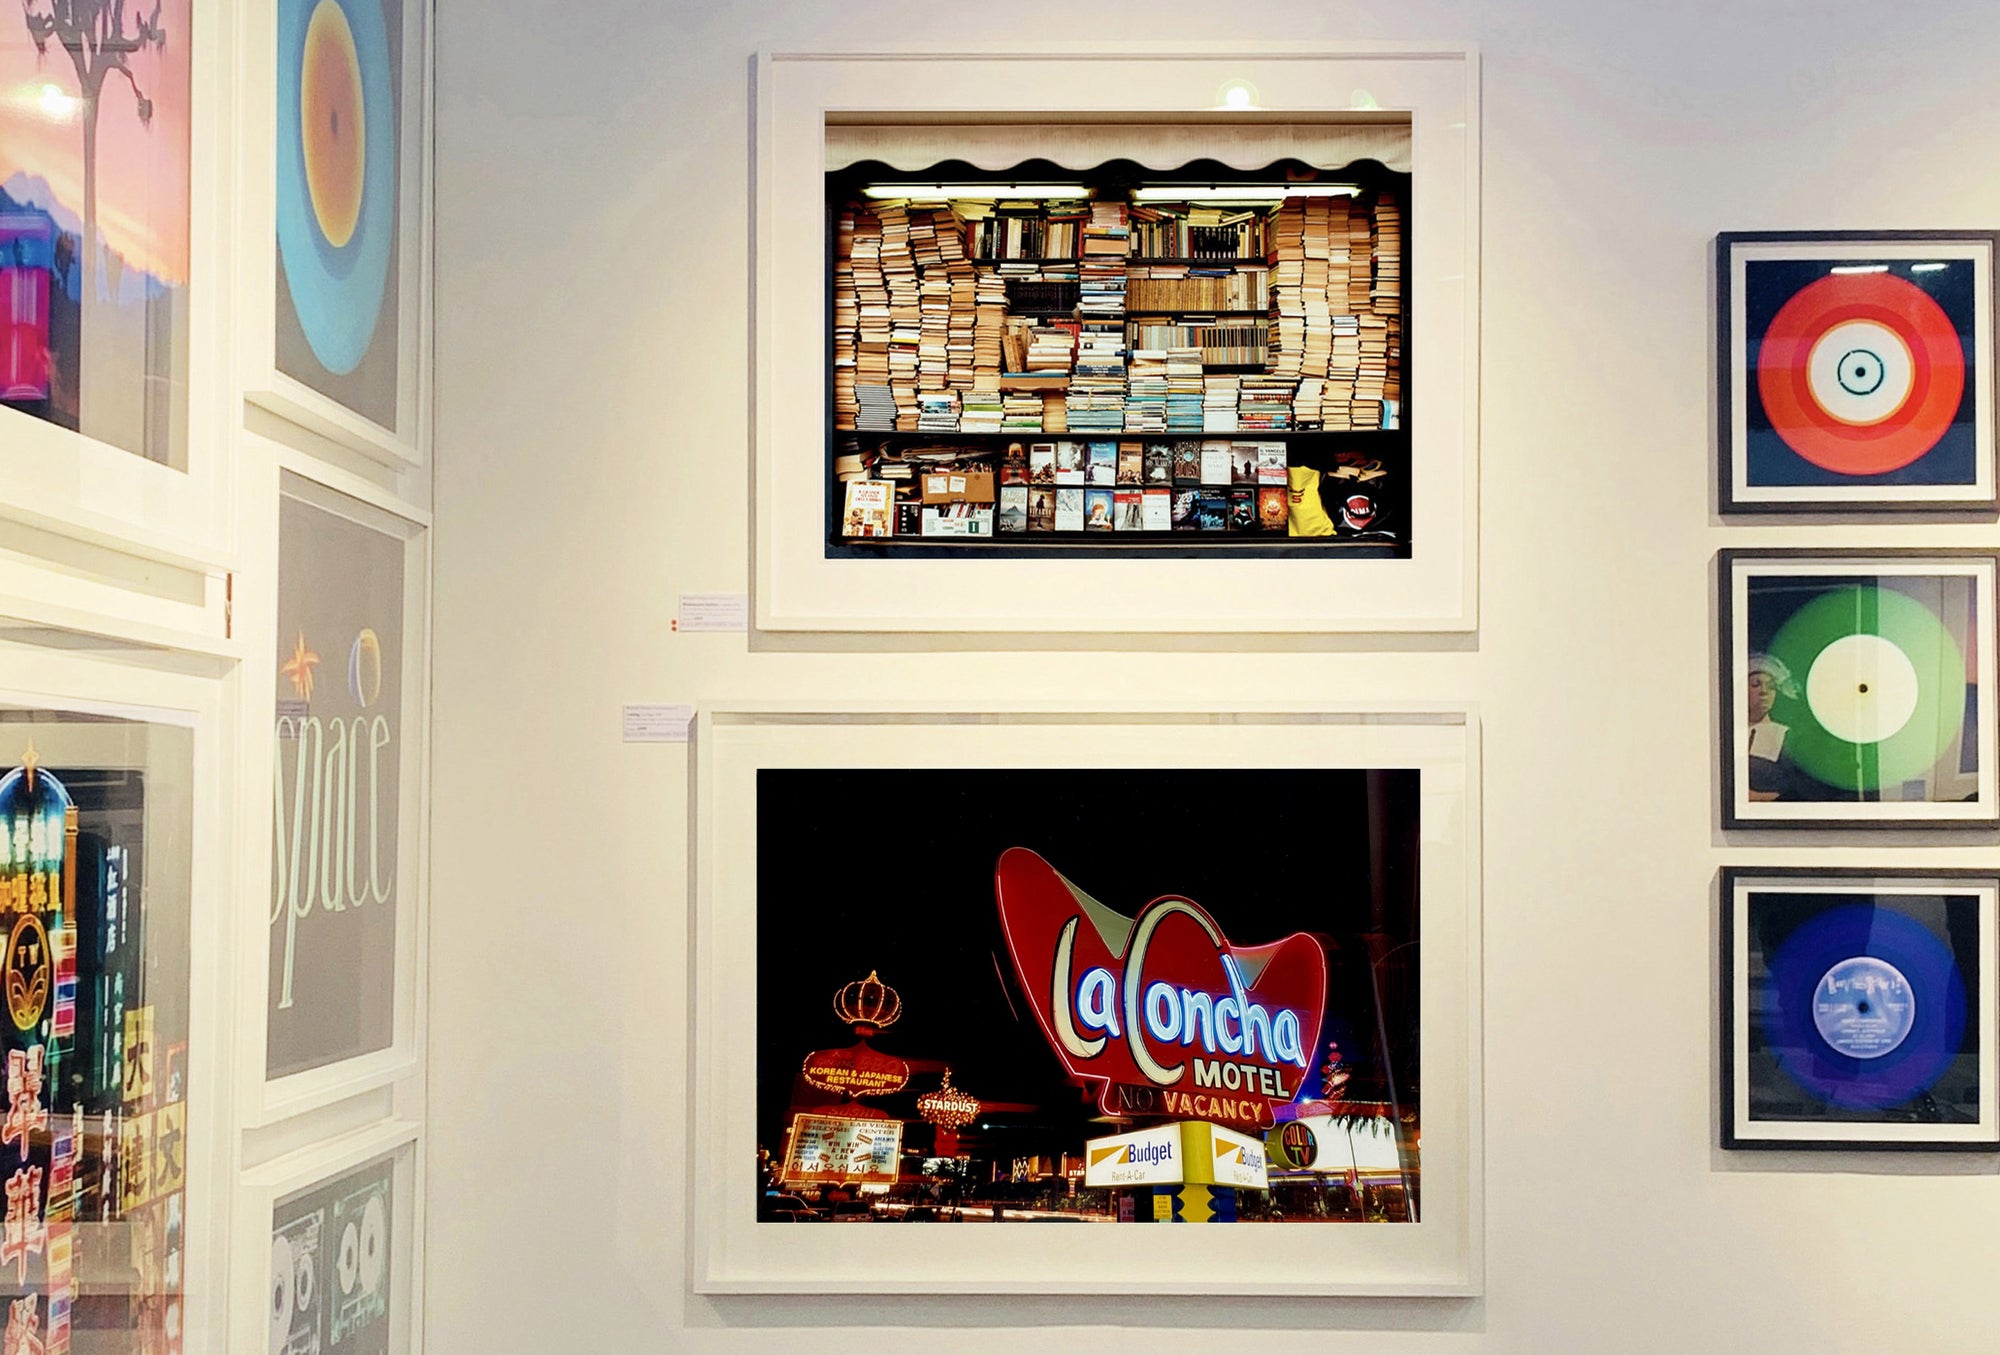 The iconic architecture of the La Concha Motel, captured by Richard Heeps for his 'Dream in Colour' series, before its closure in 2004. Designed by Paul Williams, it is synonymous of the Googie style architecture popular in America during the 1950's and 1960's. The lobby is now preserved at the Las Vegas Neon Museum.